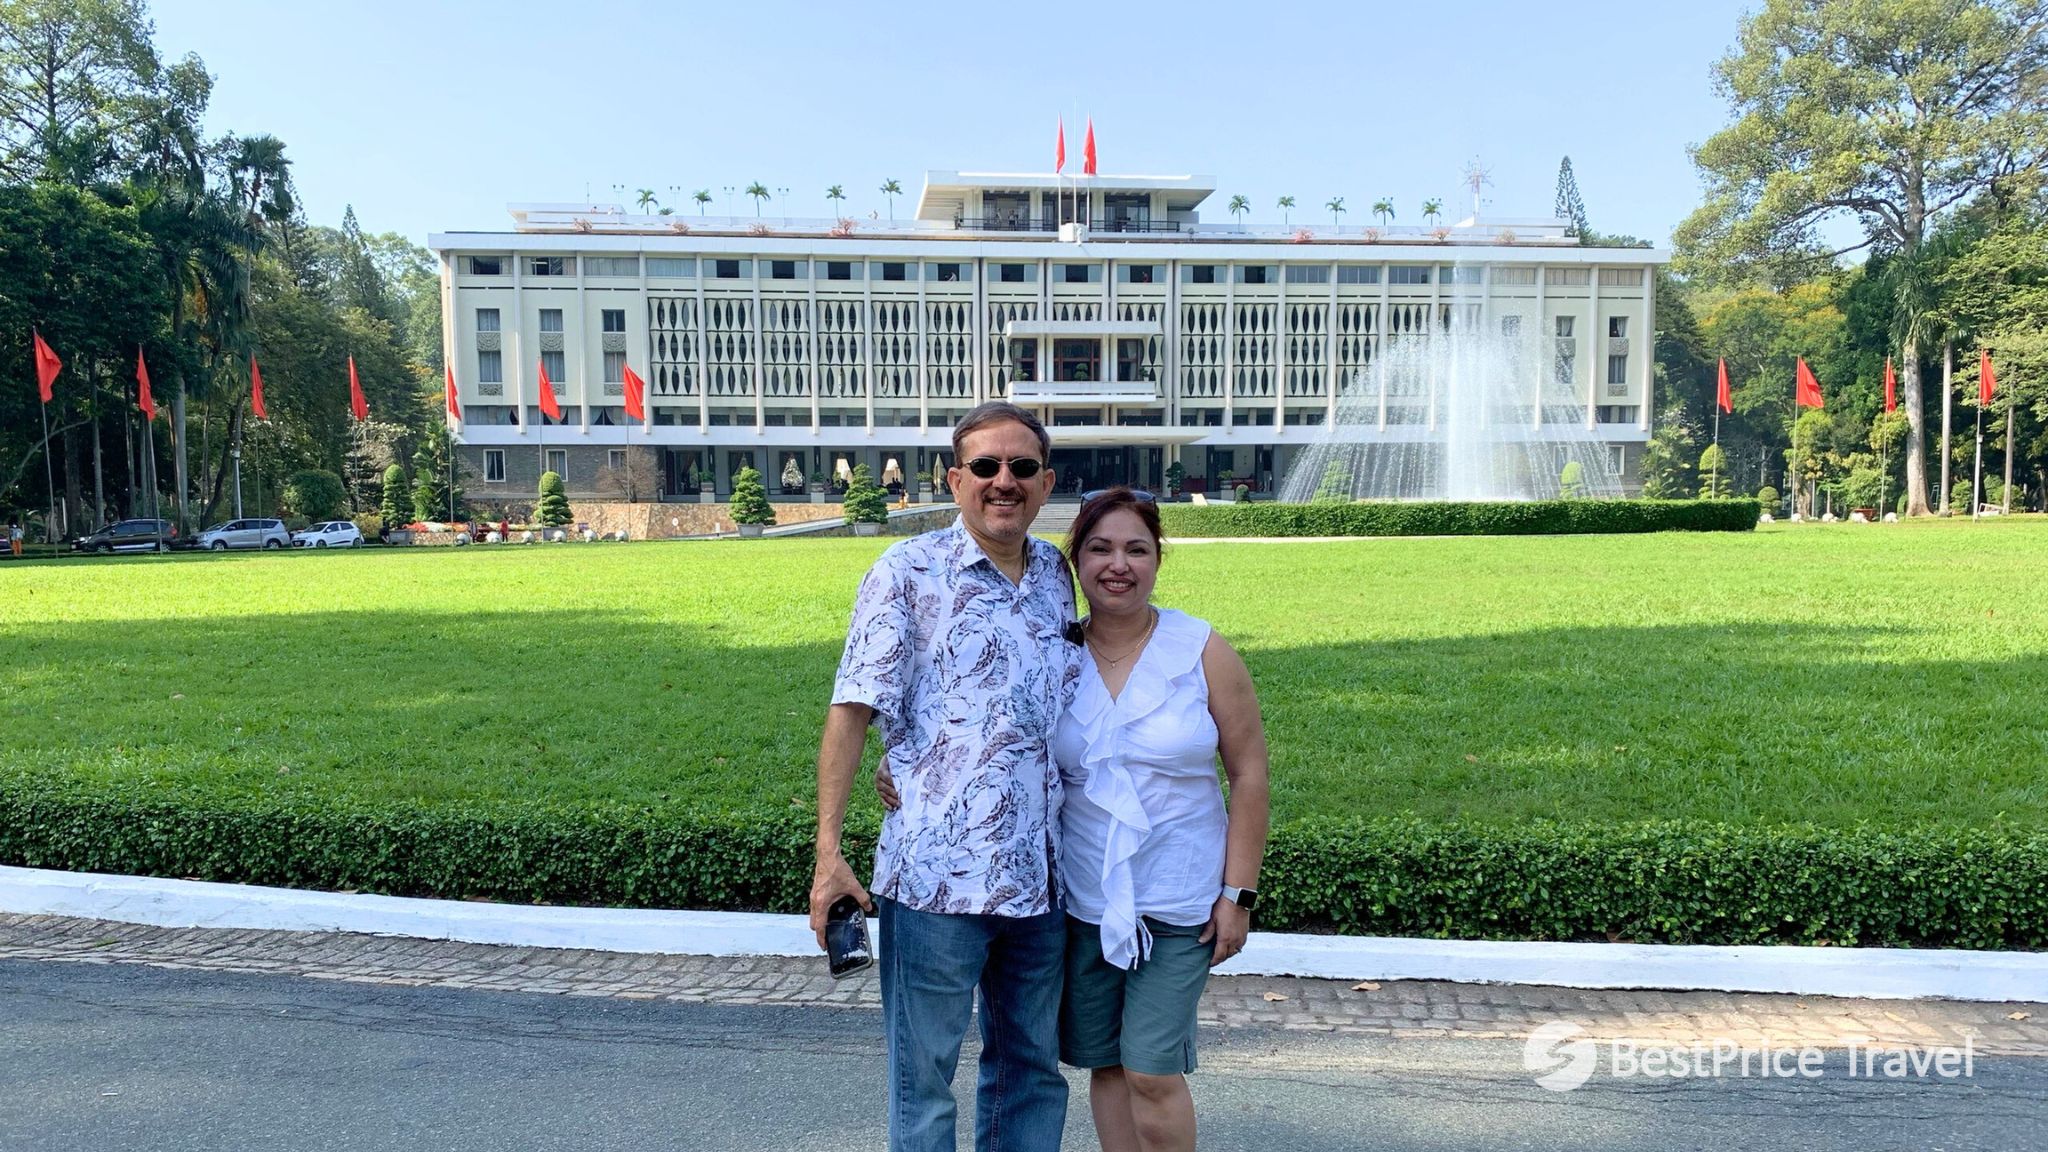 Day 11 Take Pictures In Front Of The Reunification Palace